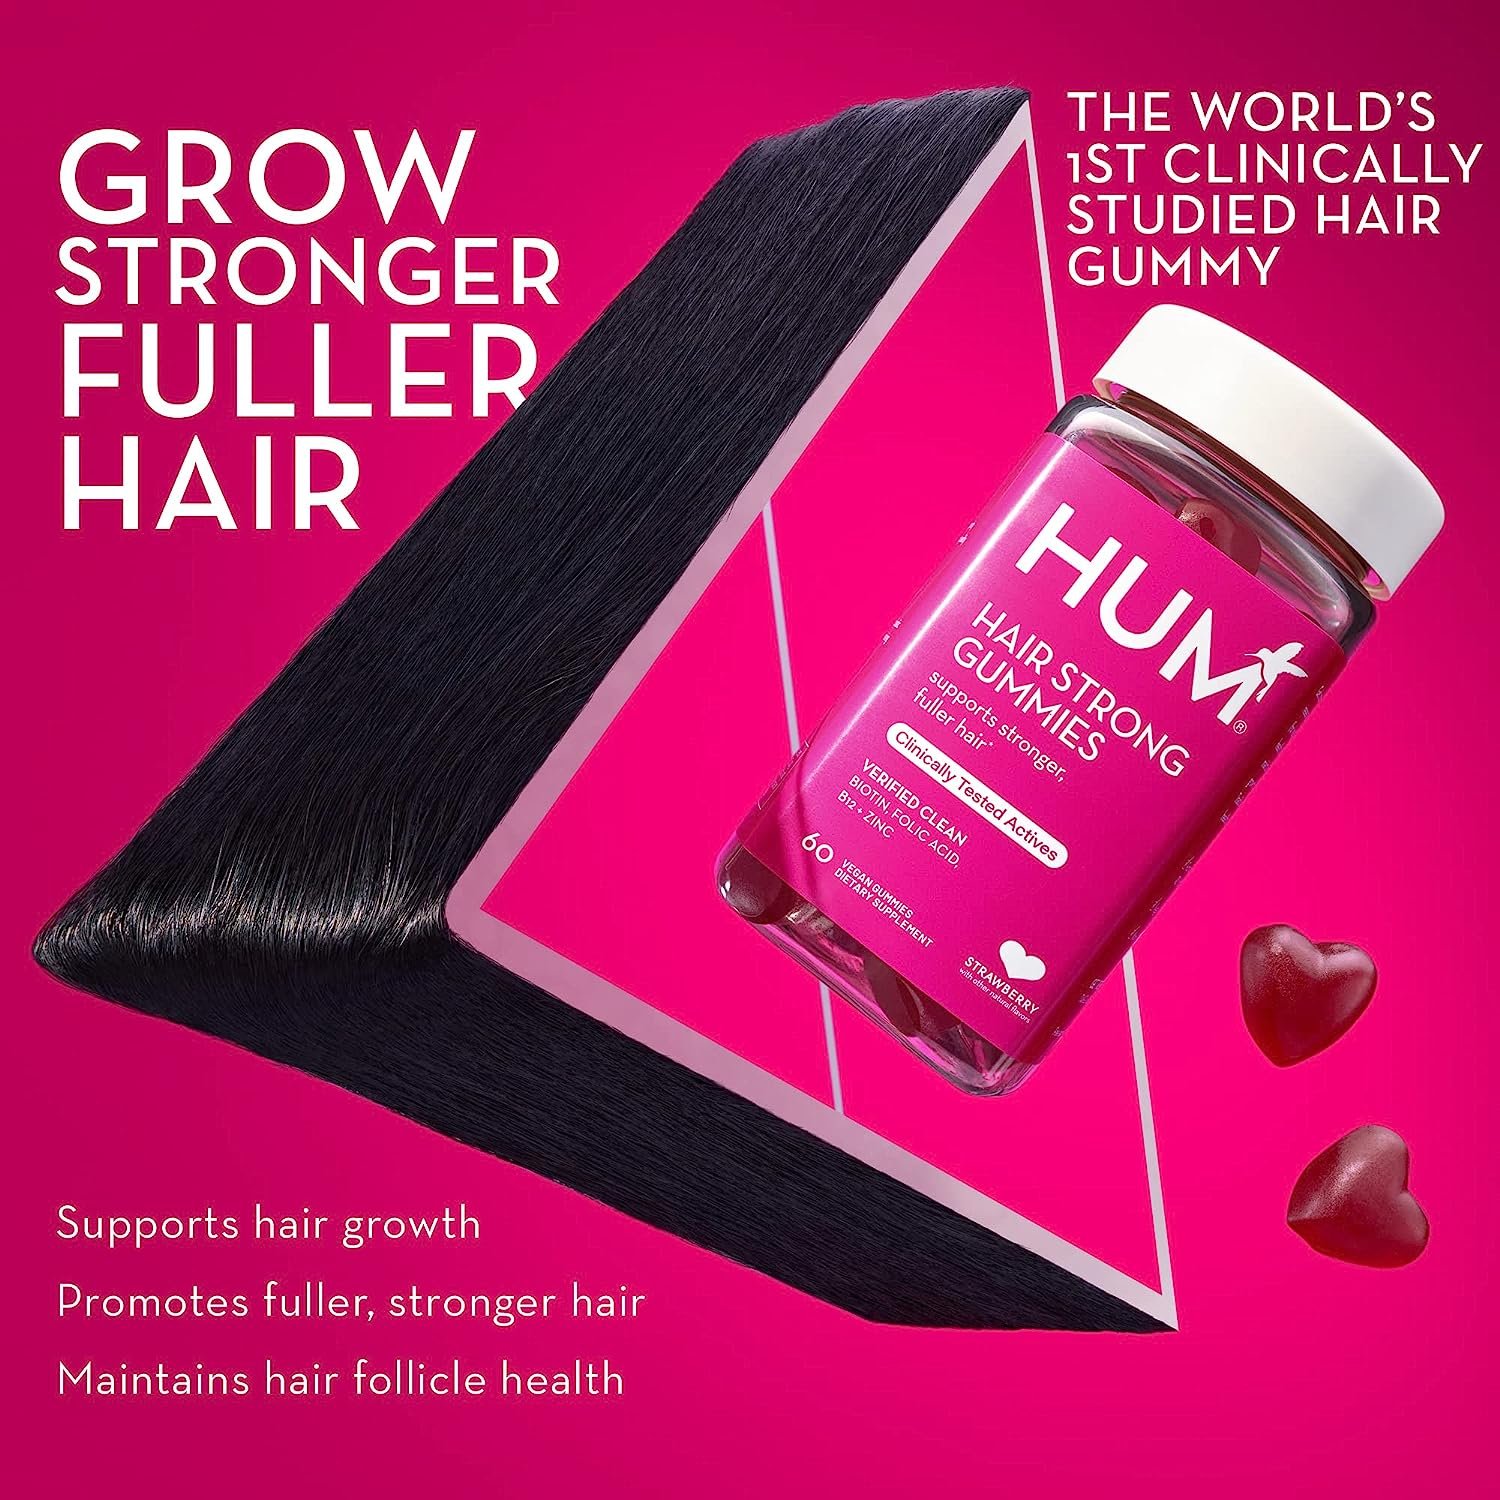 HUM Hair Strong – Daily Gummies with Biotin to Improve Hair Growth – Fo Ti, Folic Acid, Zinc, Vitamin B12 & PABA to Support Healthy Hair, Skin and Nails (60 Vegan Gummies) review